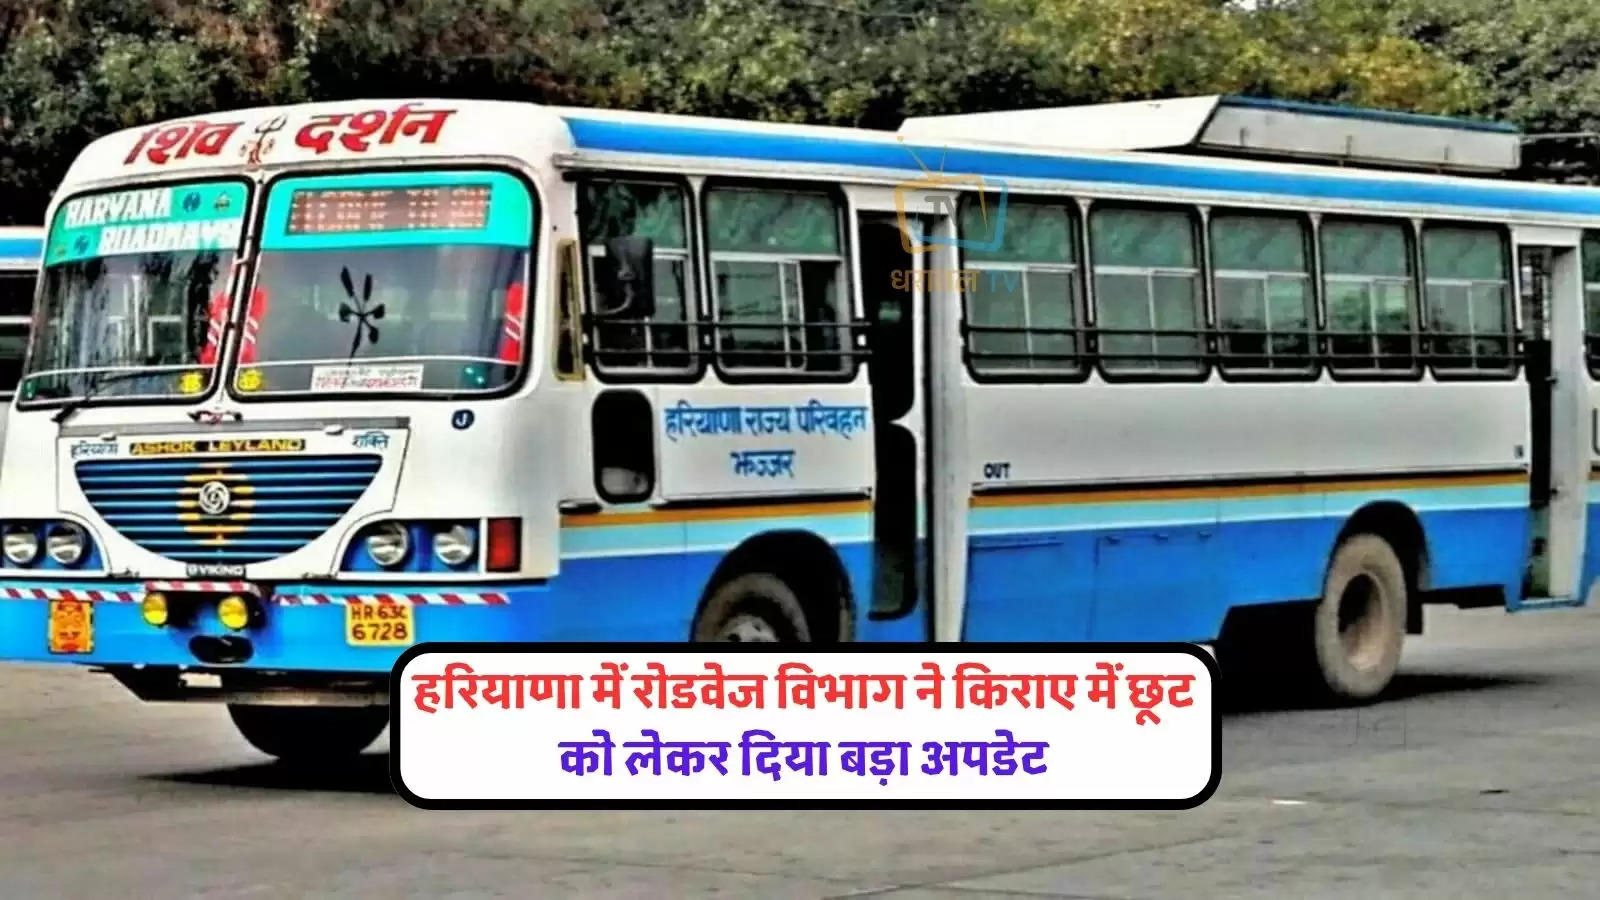 story-women-and-elderly-persons-will-get-discount-on-fare-by-identity-proof-in-haryana-roadways-buses